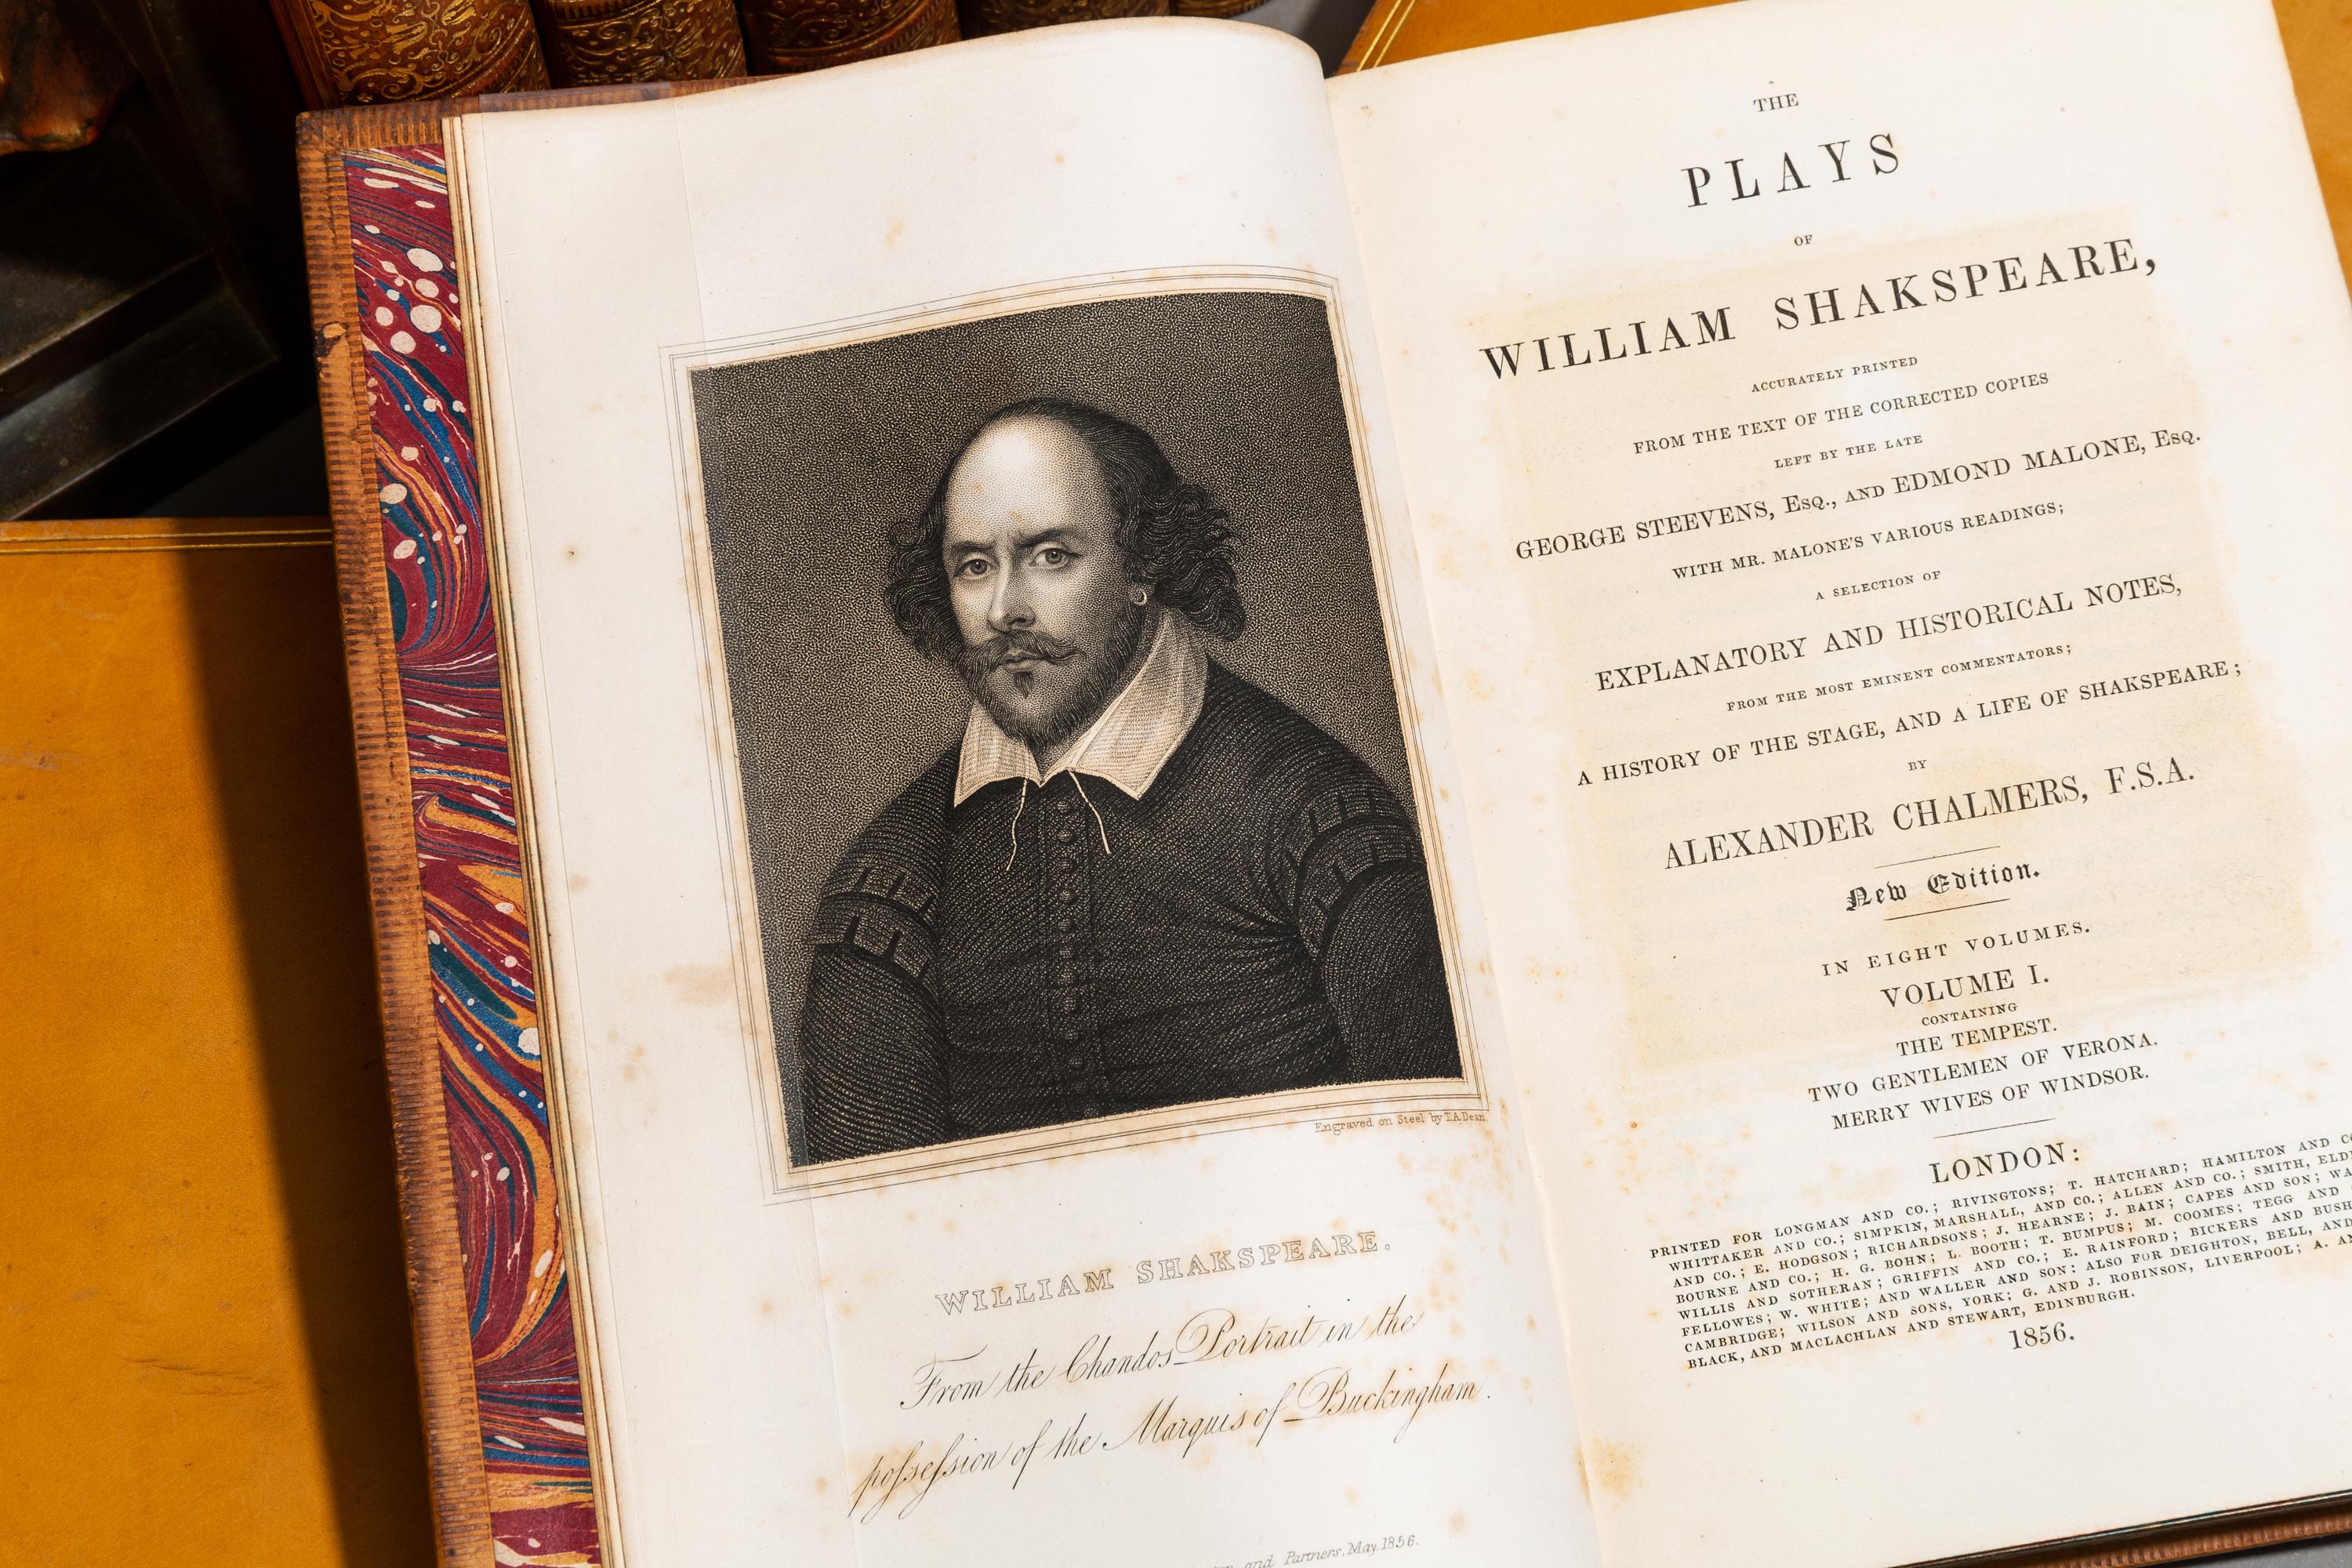 8 Volumes. William Shakespeare. The Complete Works. With A History Of The Stage & A Life of Shakespeare by Alexander Chambers. Bound in Full tan calf, marbled endpapers, raised bands, gilt panels. Published: London: Longman & Co. 1856.